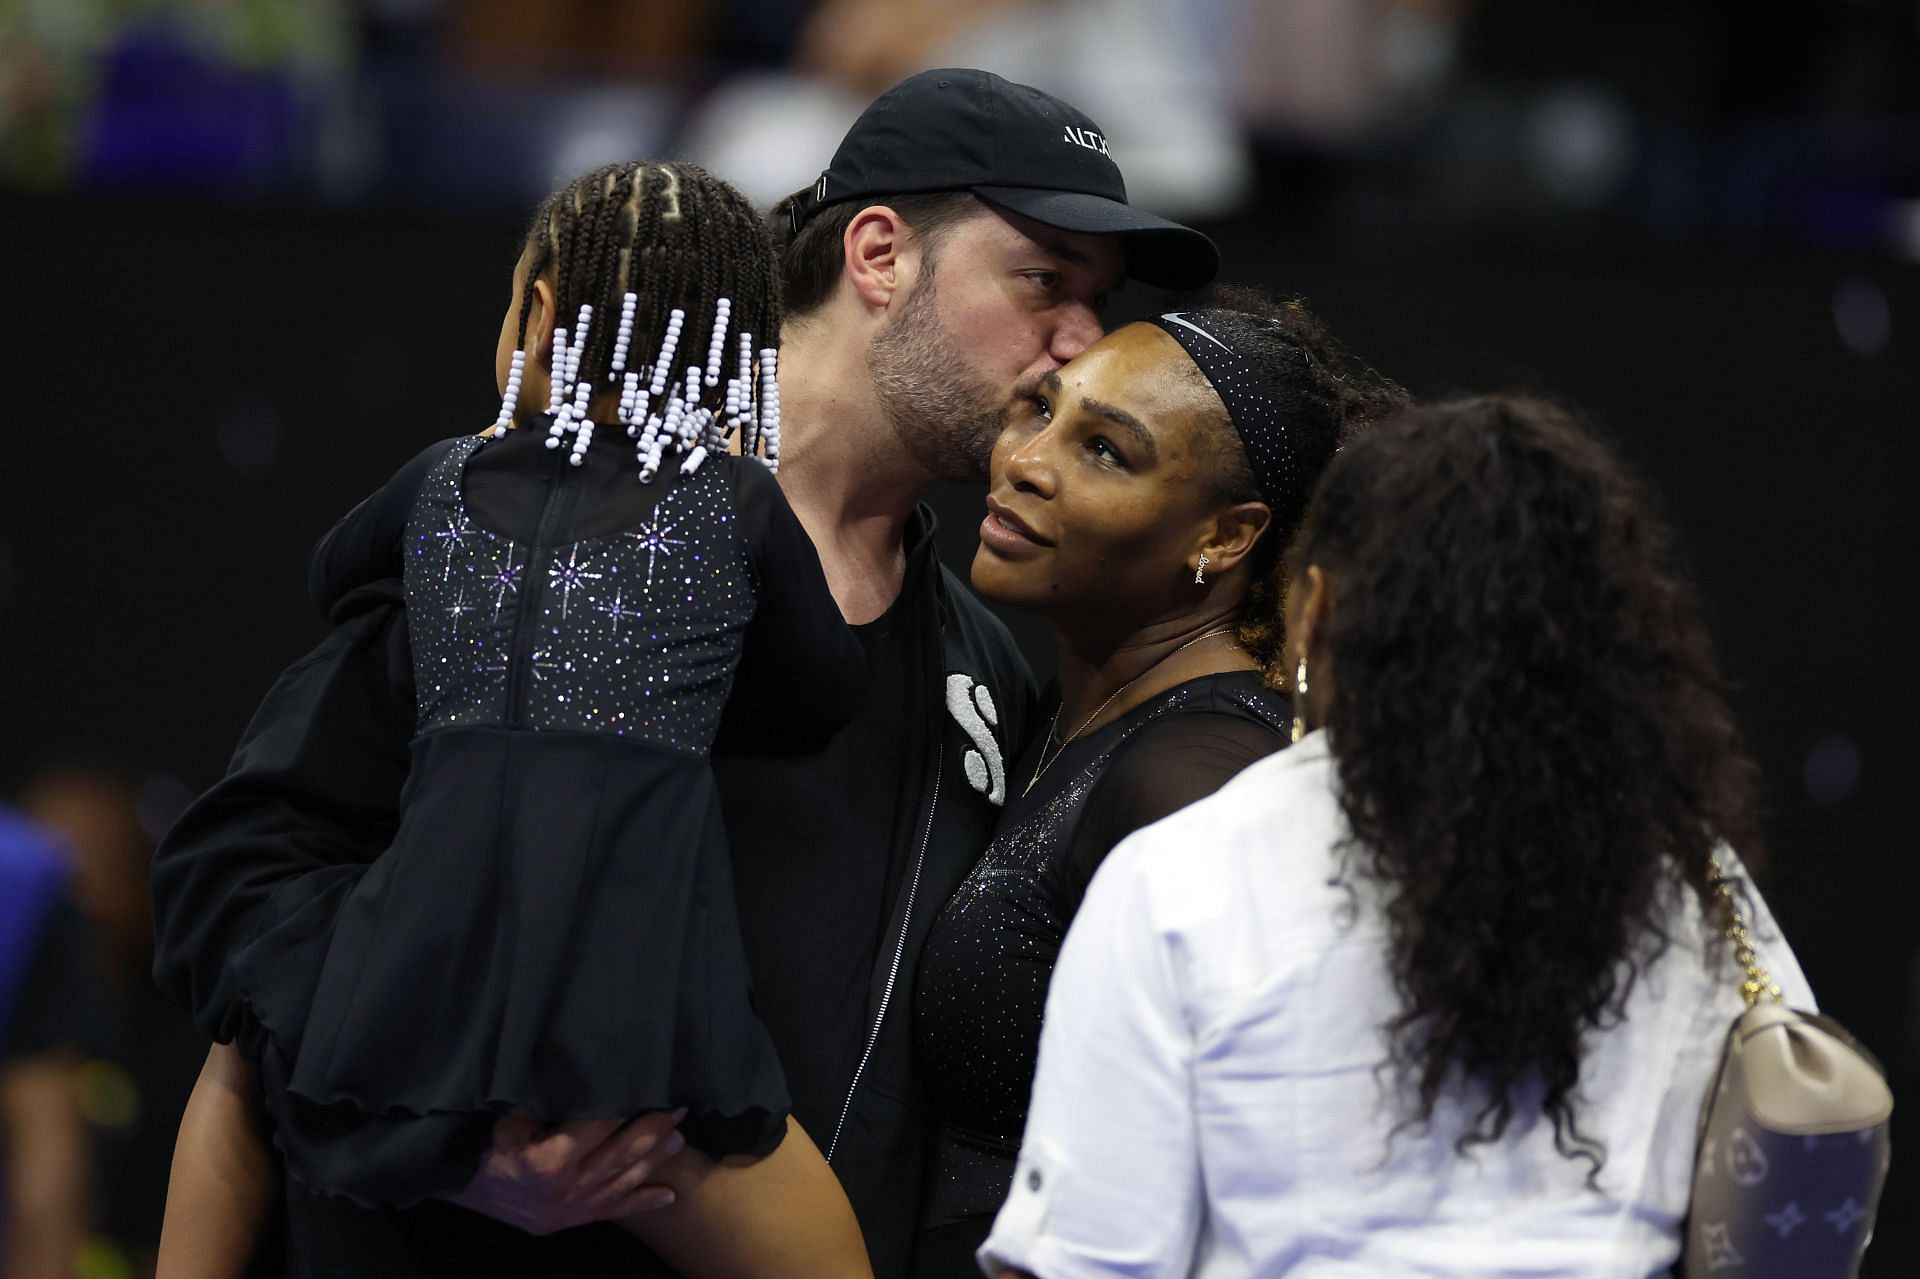 Alexis Ohanian and Serena Williams at the 2022 US Open.